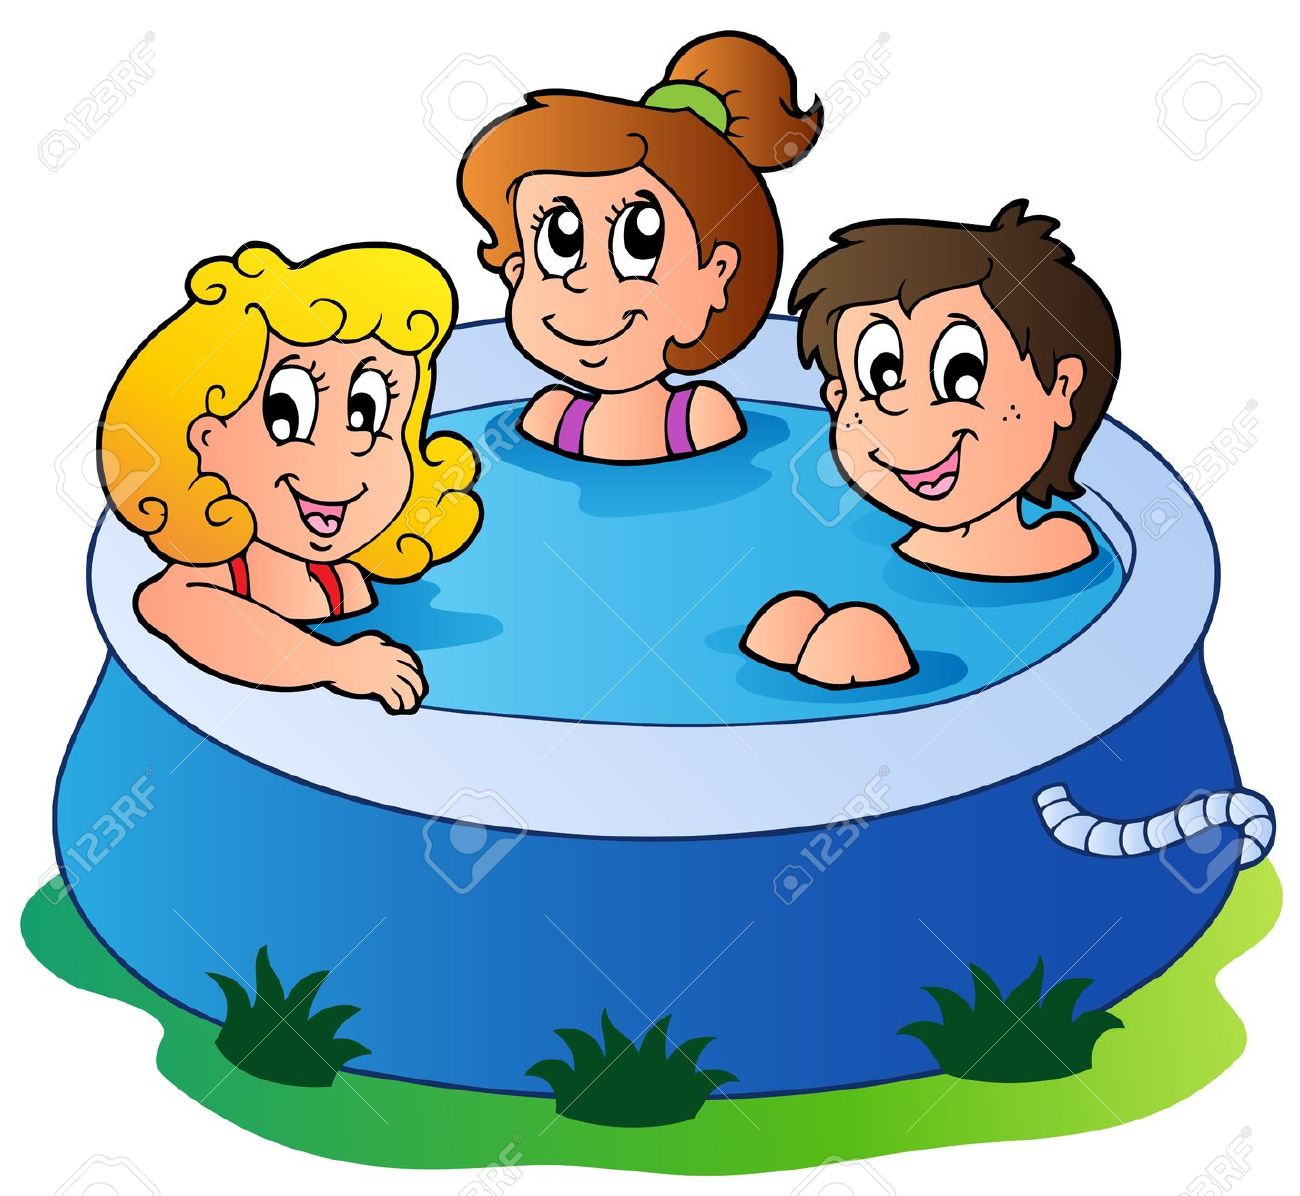 Freibad clipart » Clipart Station.